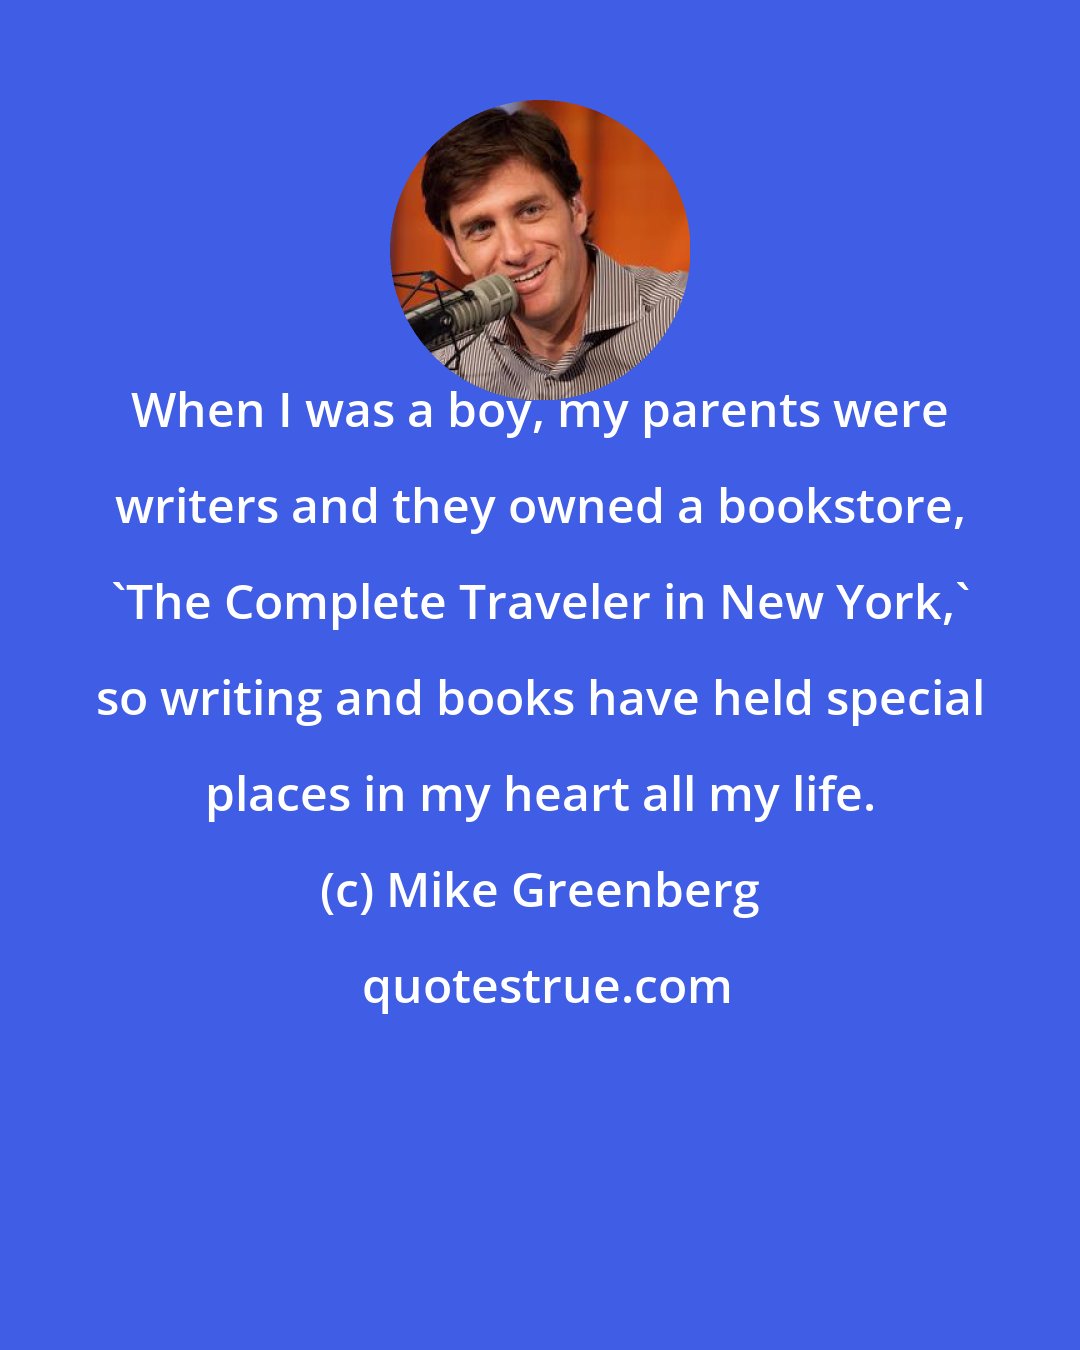 Mike Greenberg: When I was a boy, my parents were writers and they owned a bookstore, 'The Complete Traveler in New York,' so writing and books have held special places in my heart all my life.